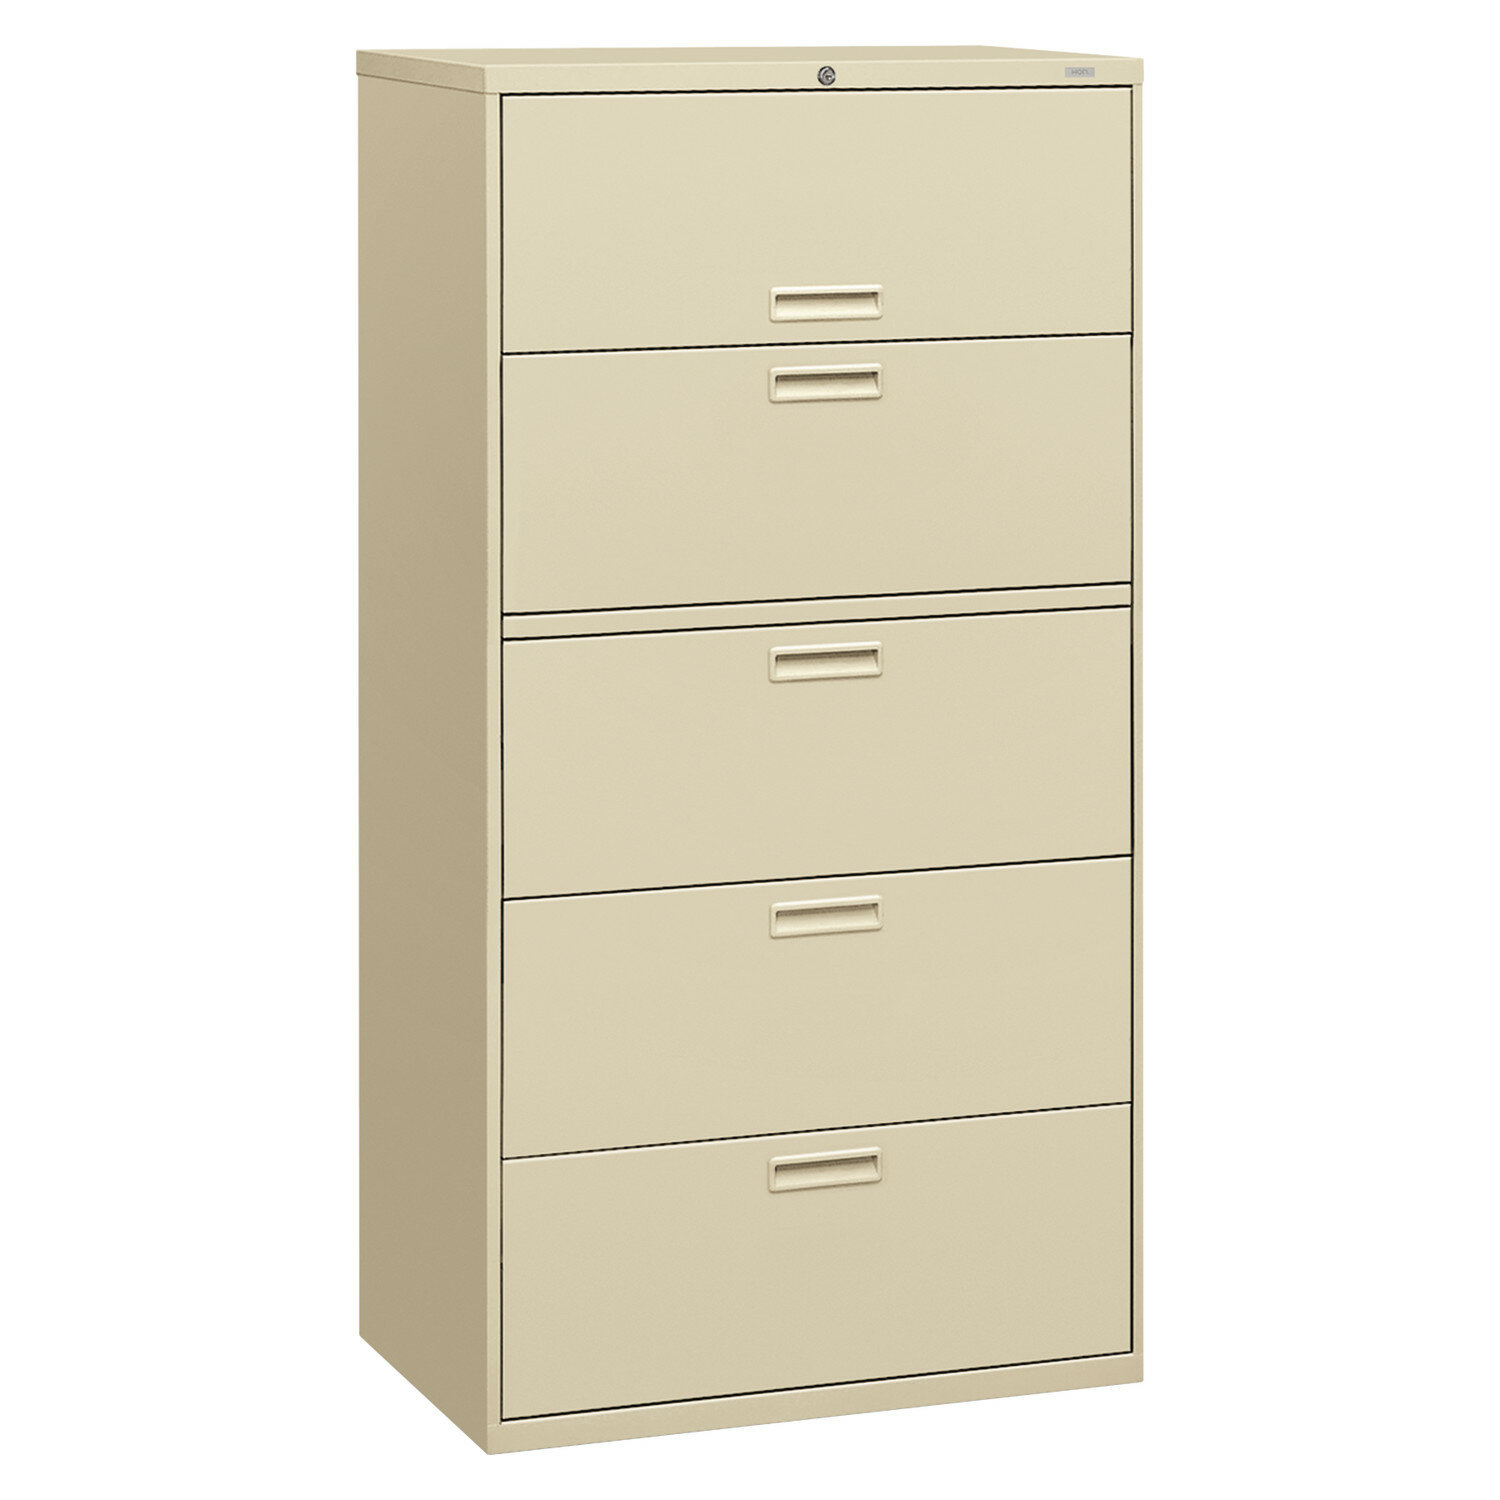 Hon 500 Series 5 Drawer Mobile Vertical Filing Cabinet Wayfair in size 1500 X 1500